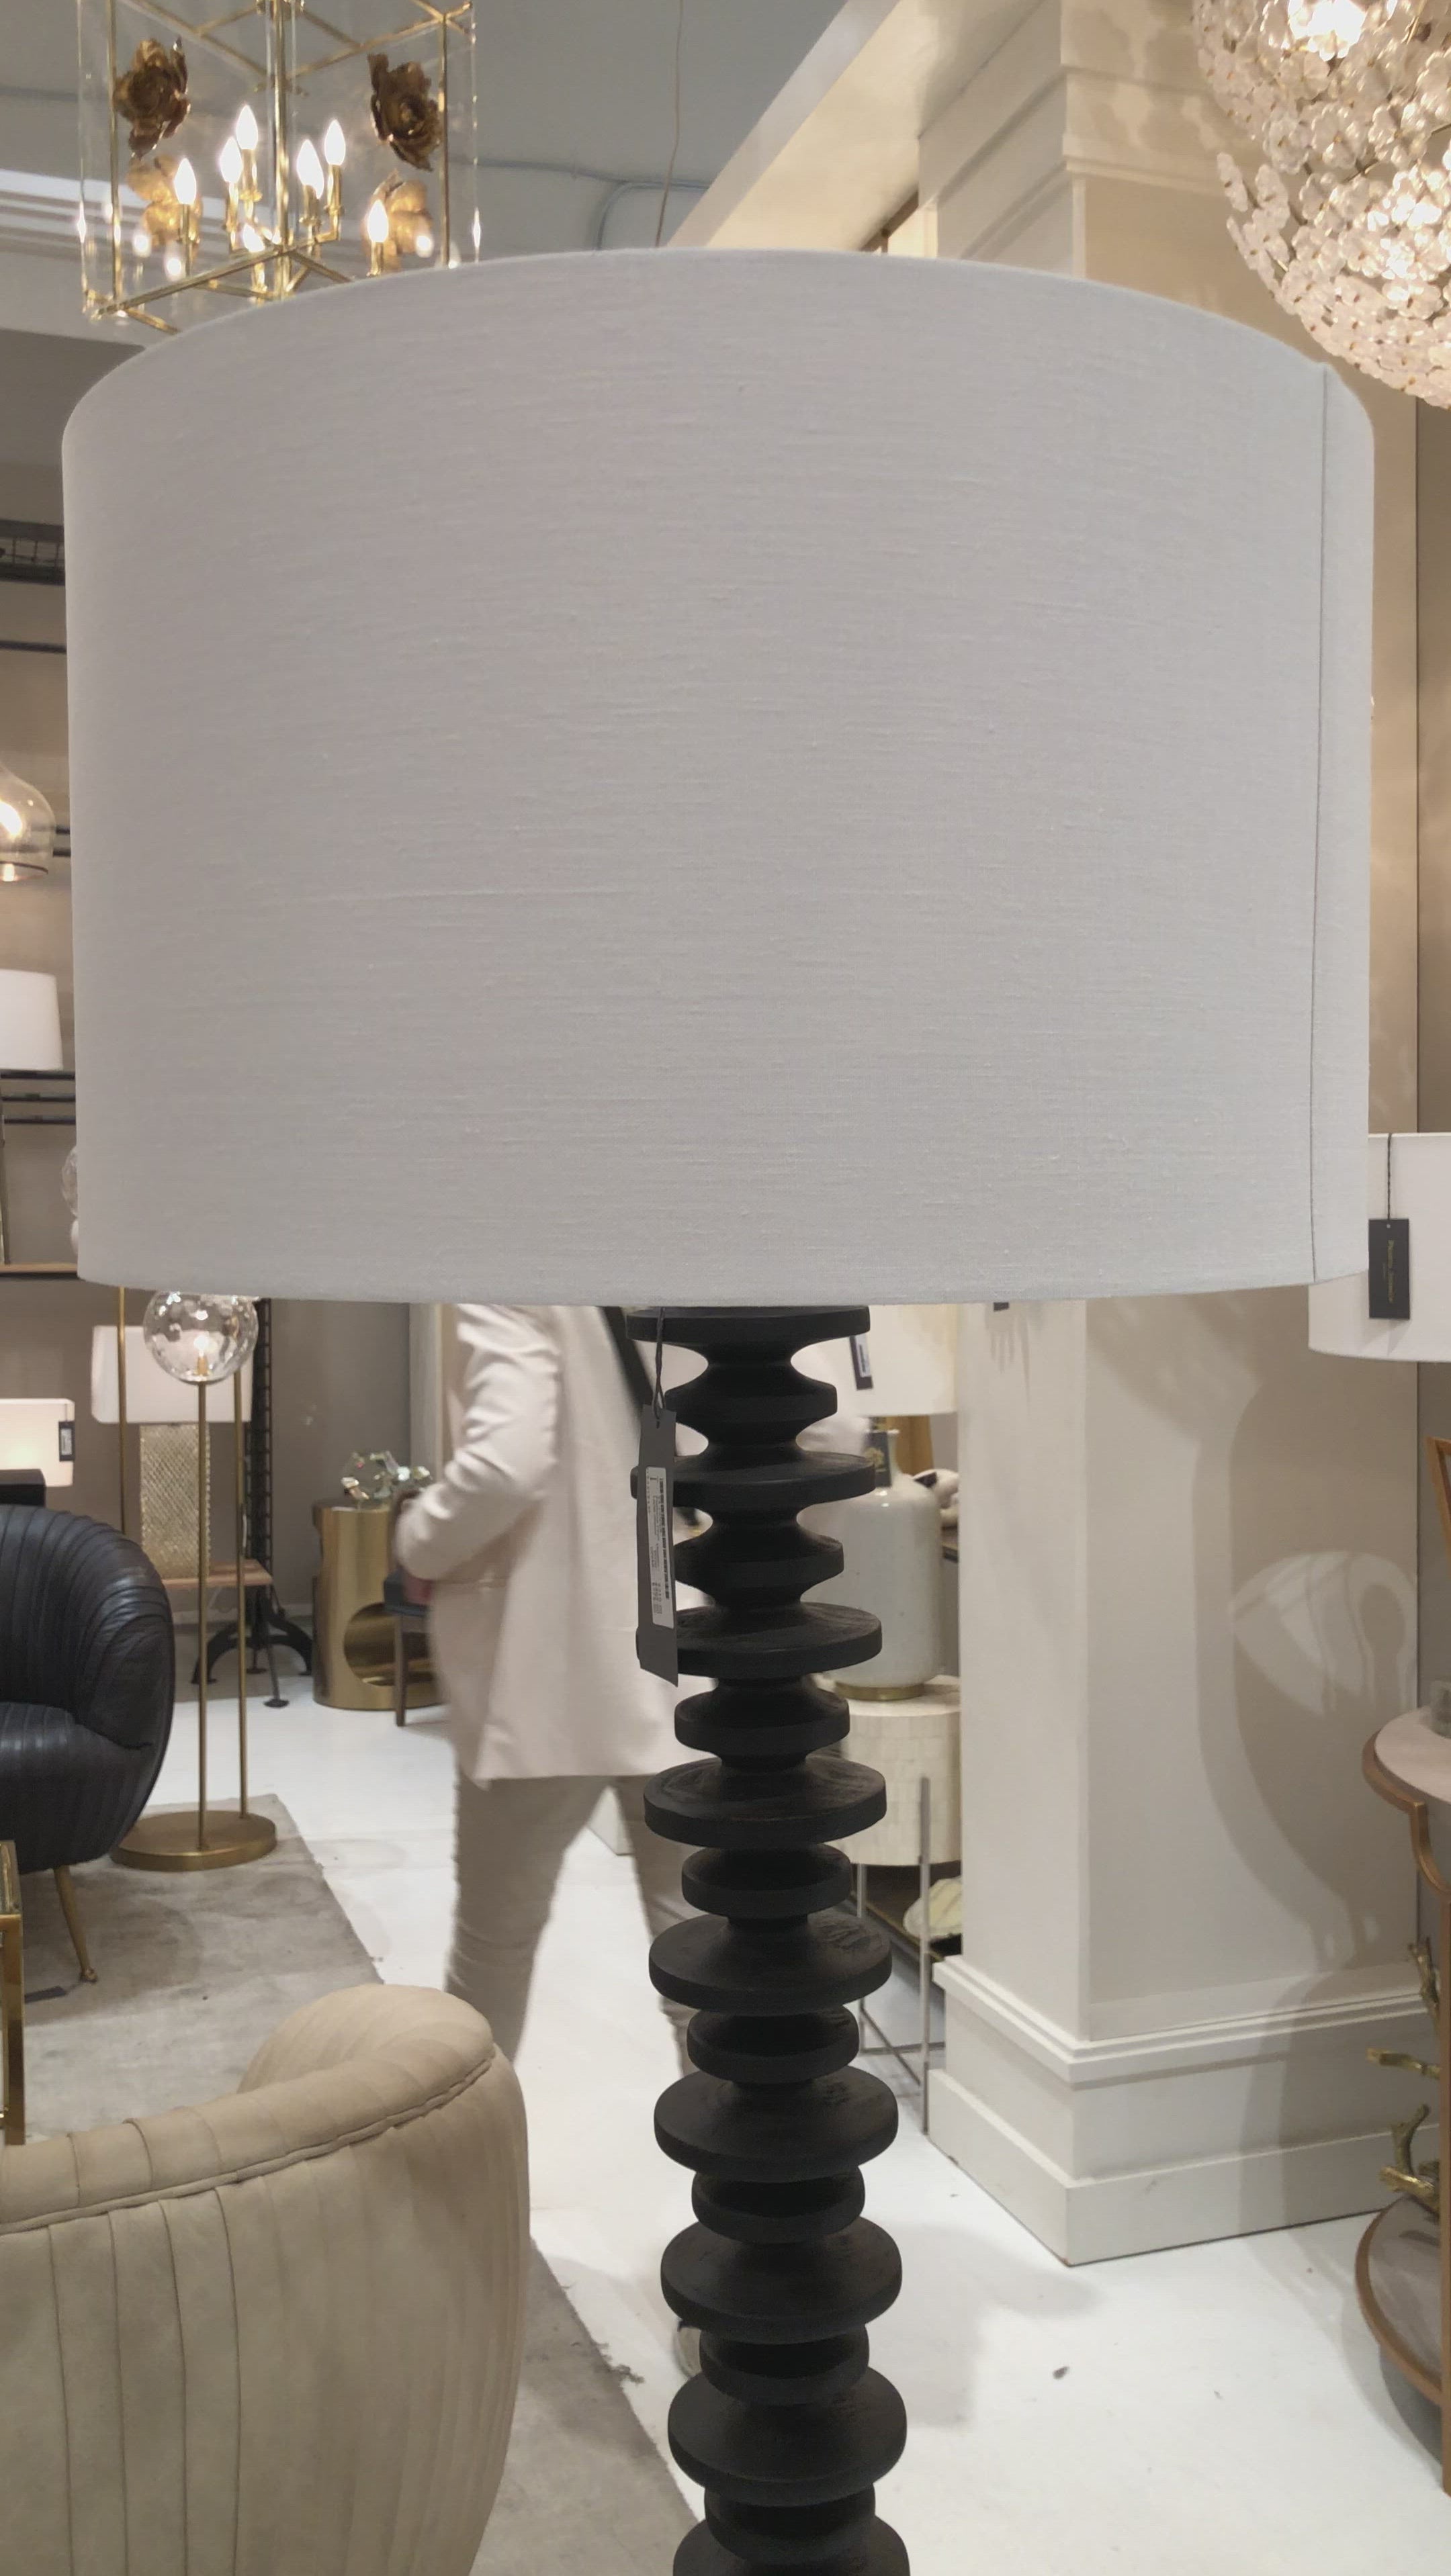 Textured bands ripple down the graduated column of our sculptural Fishbone floor lamp. Corrugated birch wood is handcrafted by artisans and balanced with a natural linen shade. This elegant profile makes a simple yet stunning statement to any living room, bedroom or den.  Size: 67"h x 21.5"w x 21.5"d